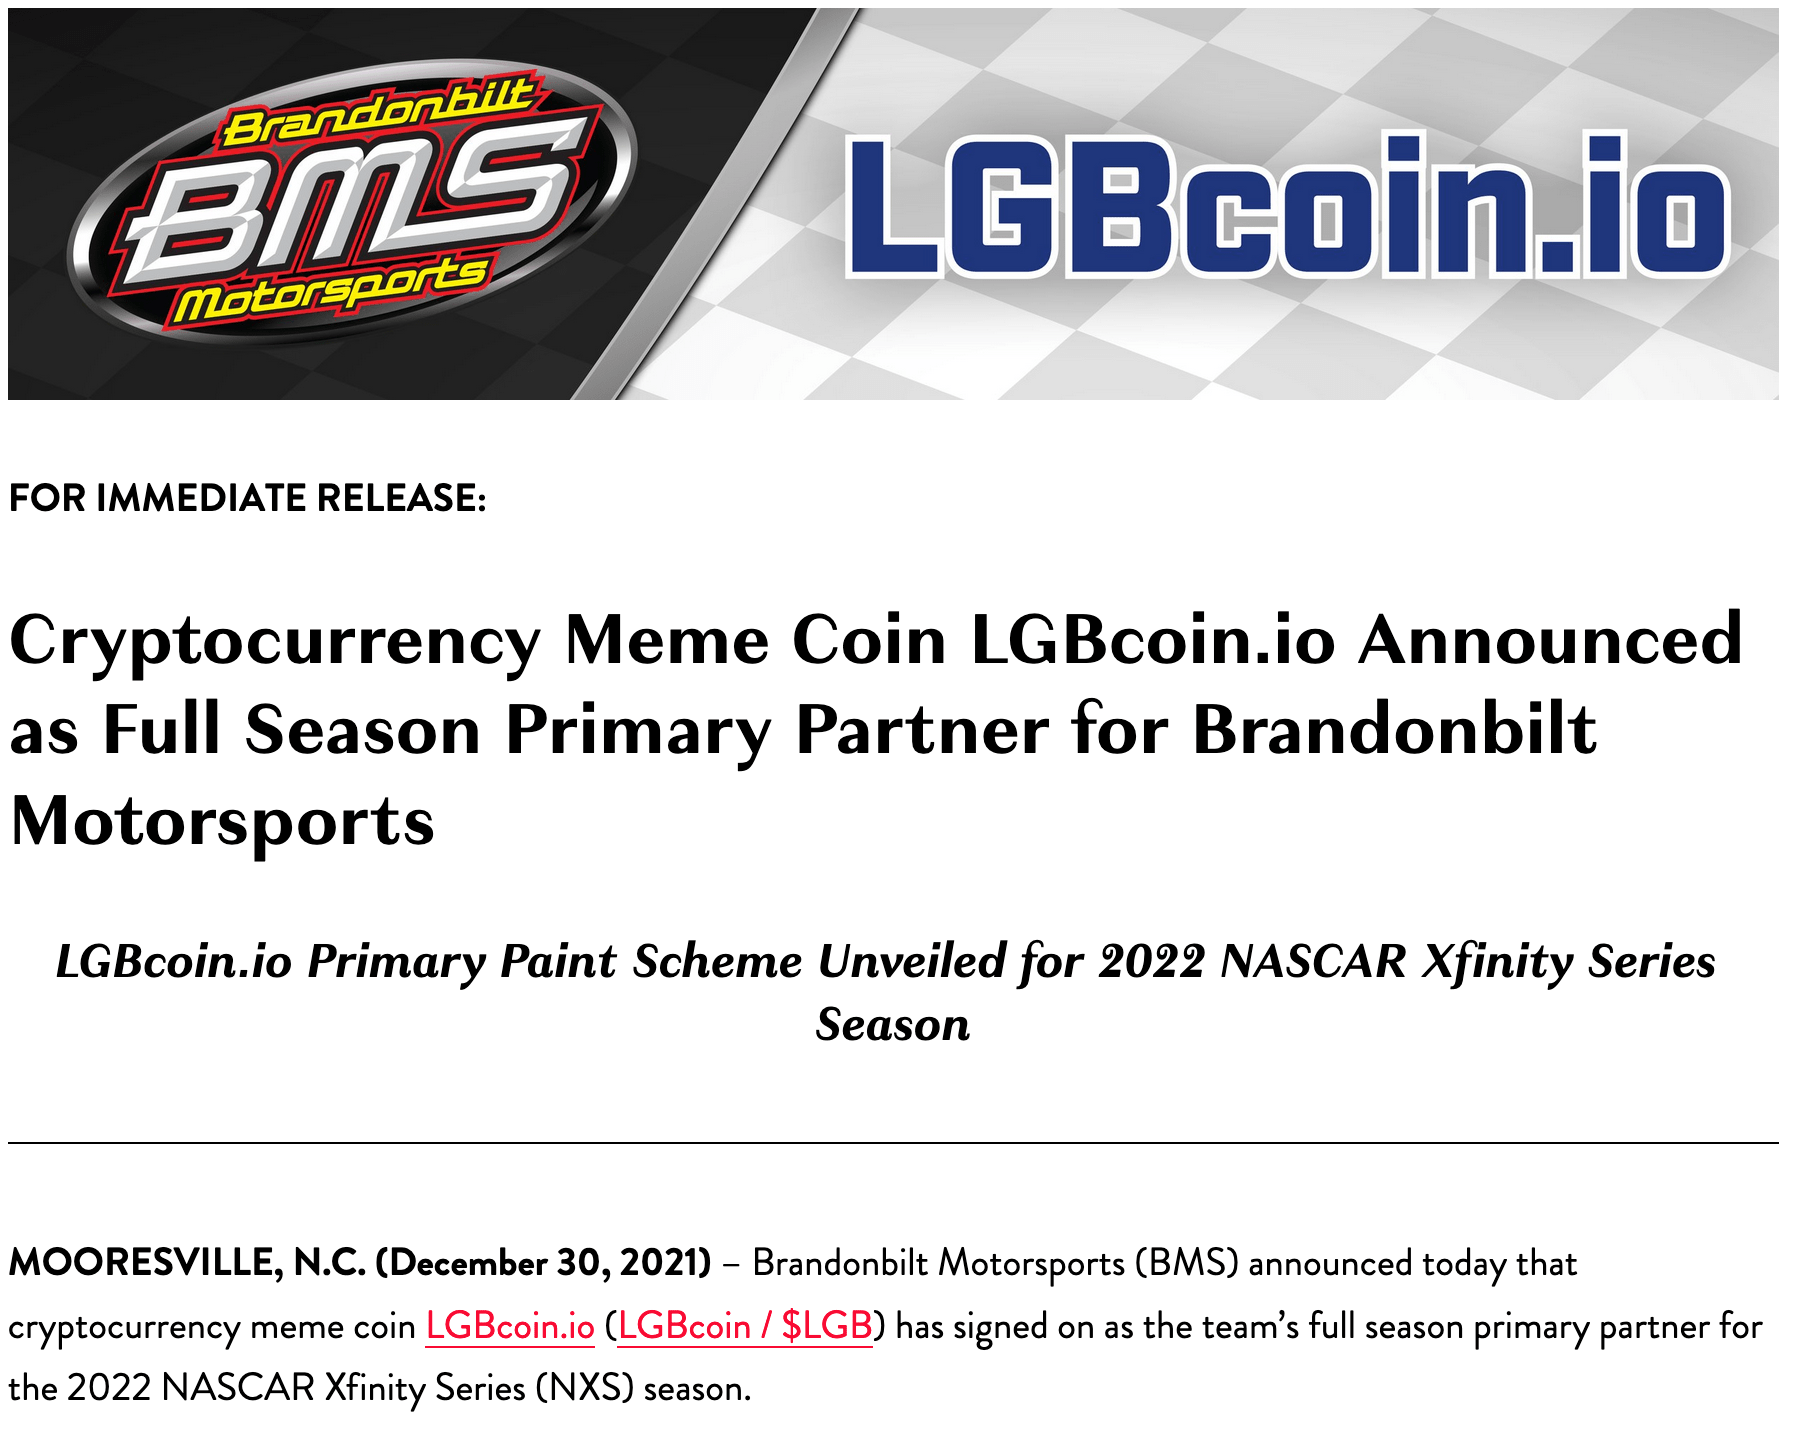 Let's Go Brandon coin PR statement upon launch. Cawthorn allegedly Cawthorn shilled for the coin.
